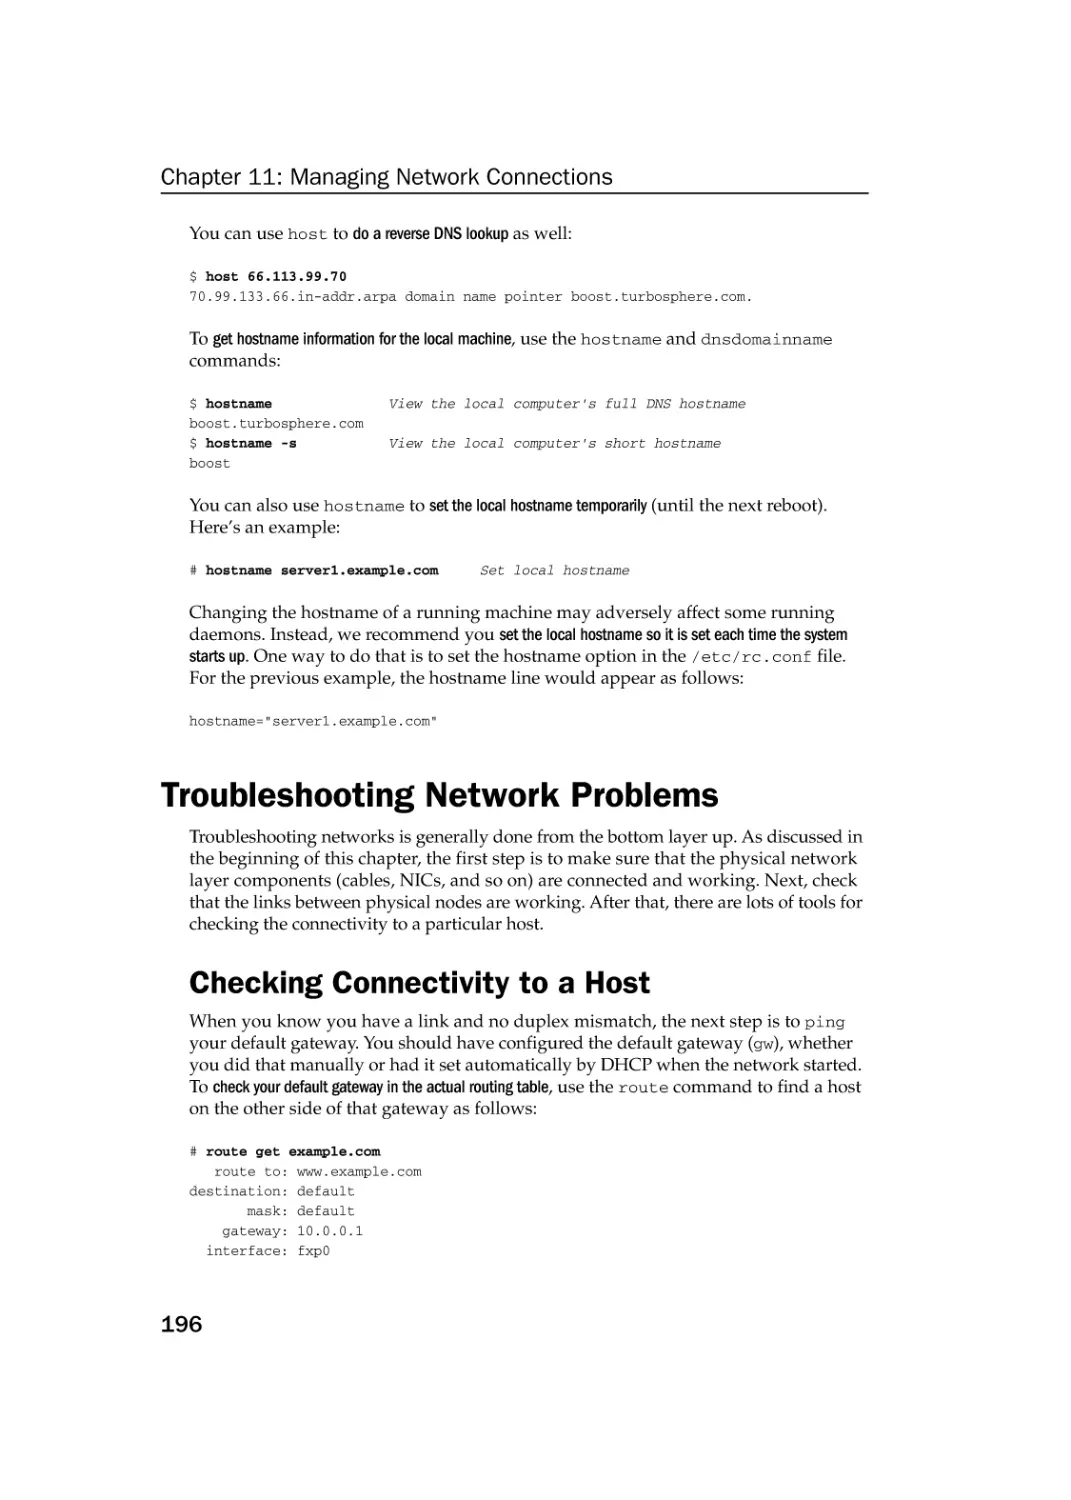 Troubleshooting Network Problems